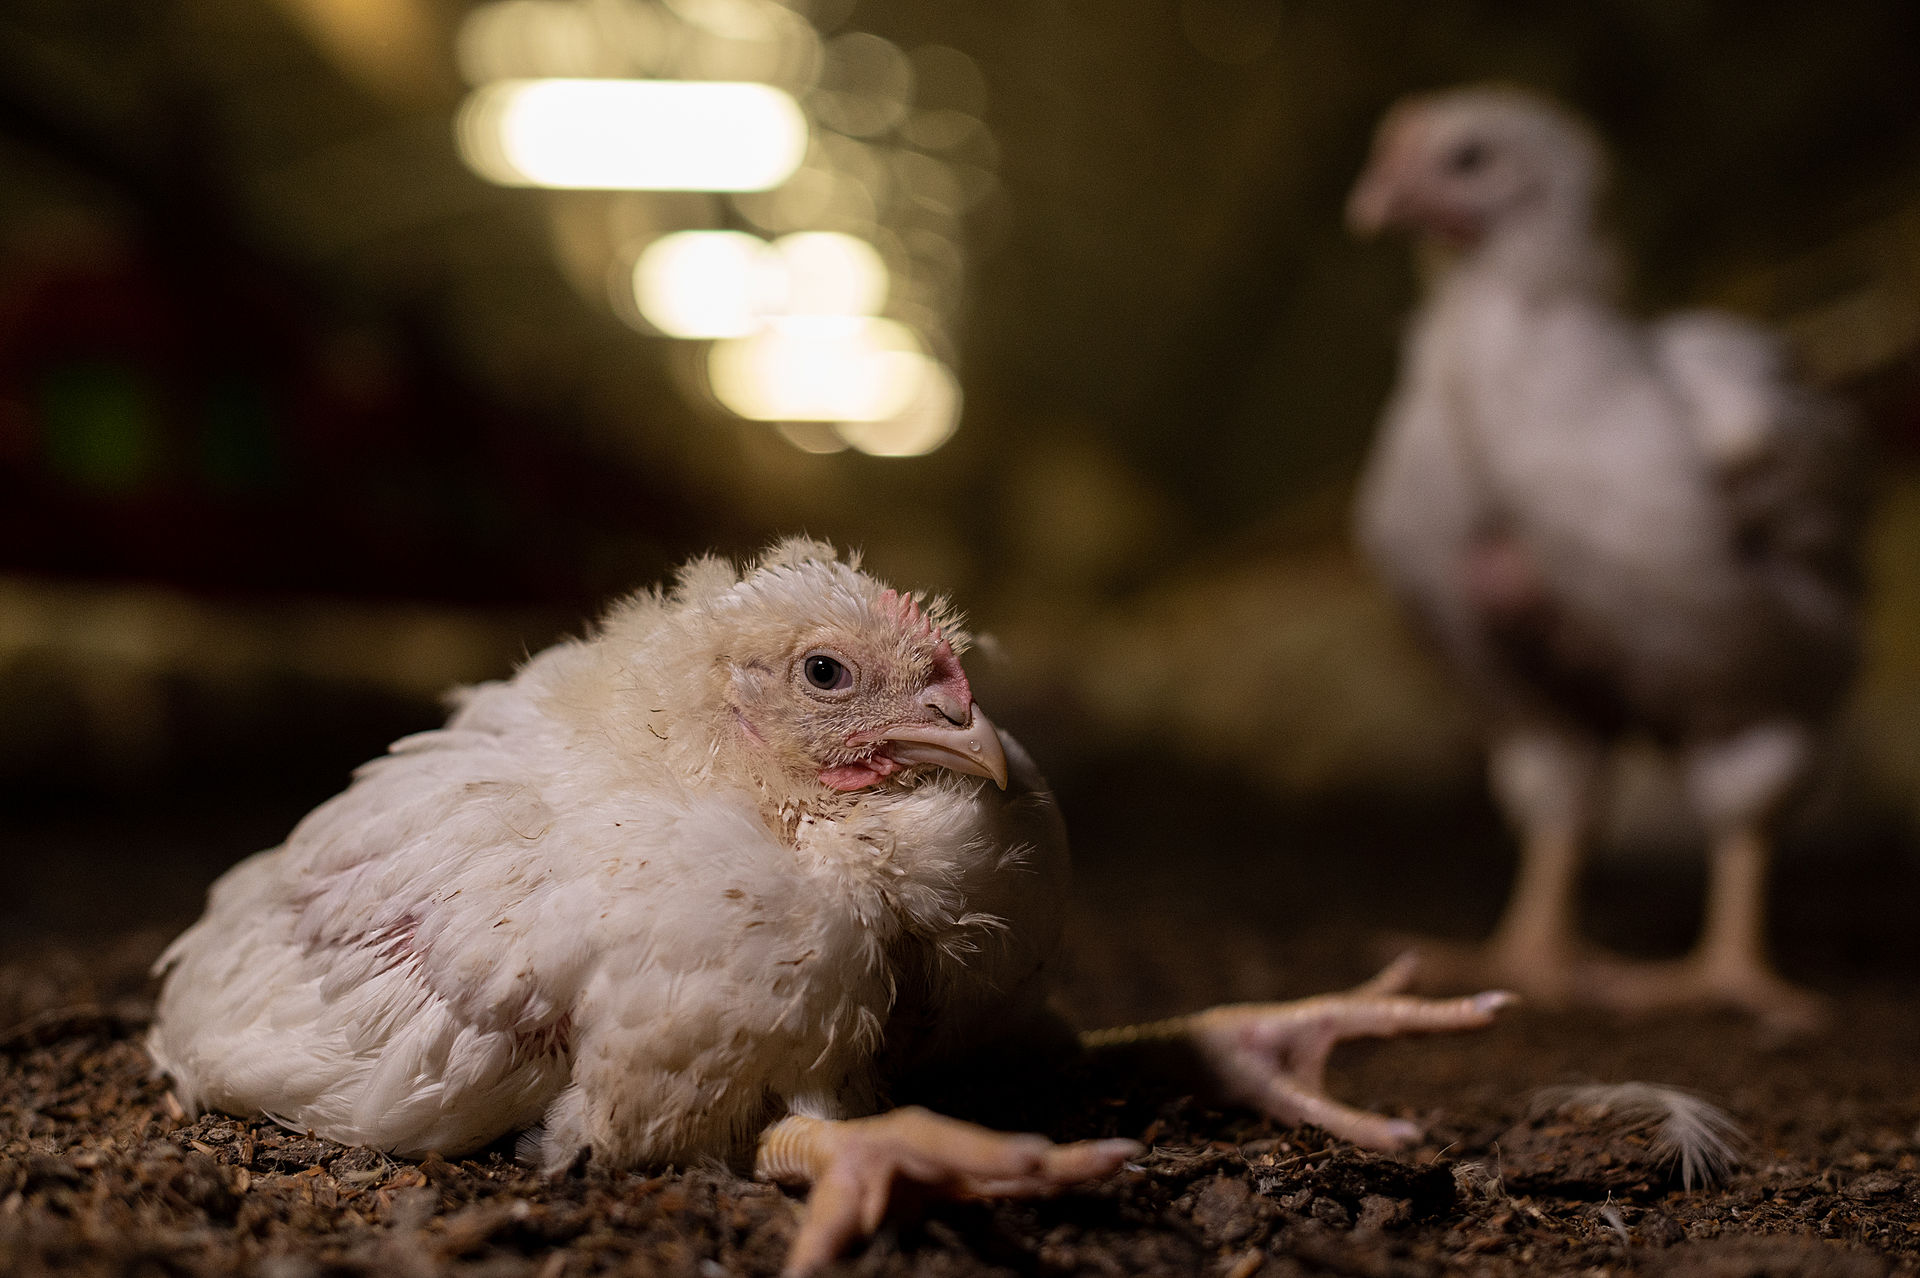 One of Europe’s biggest chicken farms is raising chickens in appalling conditions in Italy. That is the finding of a Spanish NGO <a href="https://www.equaliaong.org/" target="_blank" rel="noopener noreferrer">Equalia</a> who investigated this farm in 2021. This farm’s chickens, like those in other big broiler farms, are raised in huge sheds illuminated with continuous artificial light up to 24 hours a day. These chickens are constantly fed to increase their body weight until they reach market weight, usually in about six weeks. Following this period, they are put in cages, loaded onto trucks, and driven to the slaughterhouse.

This farm is part of a much larger farming industry located in Italy’s northern and northeastern regions where most of the country’s chickens are slaughtered. The annual number of poultry slaughtered is second only to the number of pigs killed per year, with one company alone slaughtering over 350 million birds annually. Italy’s poultry industry is mostly vertically integrated: the same companies own the entire supply chain, from breeder flocks, hatcheries and grow-out flocks to feed production, slaughter and processing. 

Hundreds of family- or corporate-owned farms, slaughterhouses, and feed producers are located within a 50-kilometer range. The biggest farm reportedly has five floors with about 20,000 chickens on each floor. On these farms, chicks are usually killed after just 40 days. Many may die from disease or thirst. Their fast growth rate often causes leg problems with birds unable to support their own weight. Chicks lying on the ground in agony, unable to reach water dispenser systems is also a common sight.